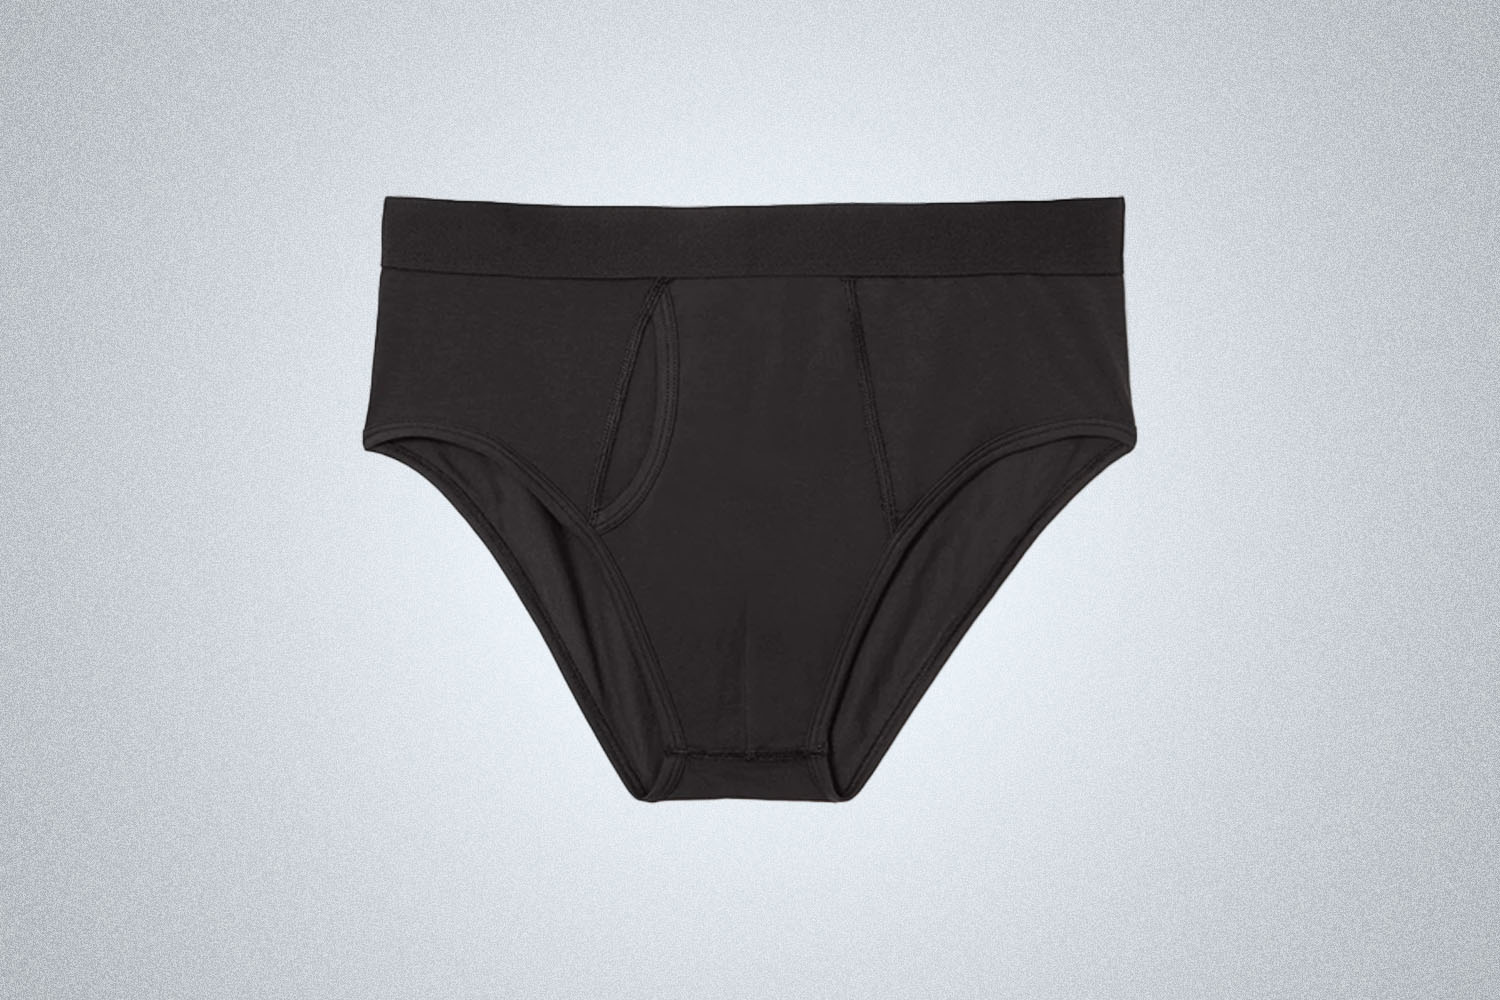 a pair of black boxer briefs from Everlane on a grey background